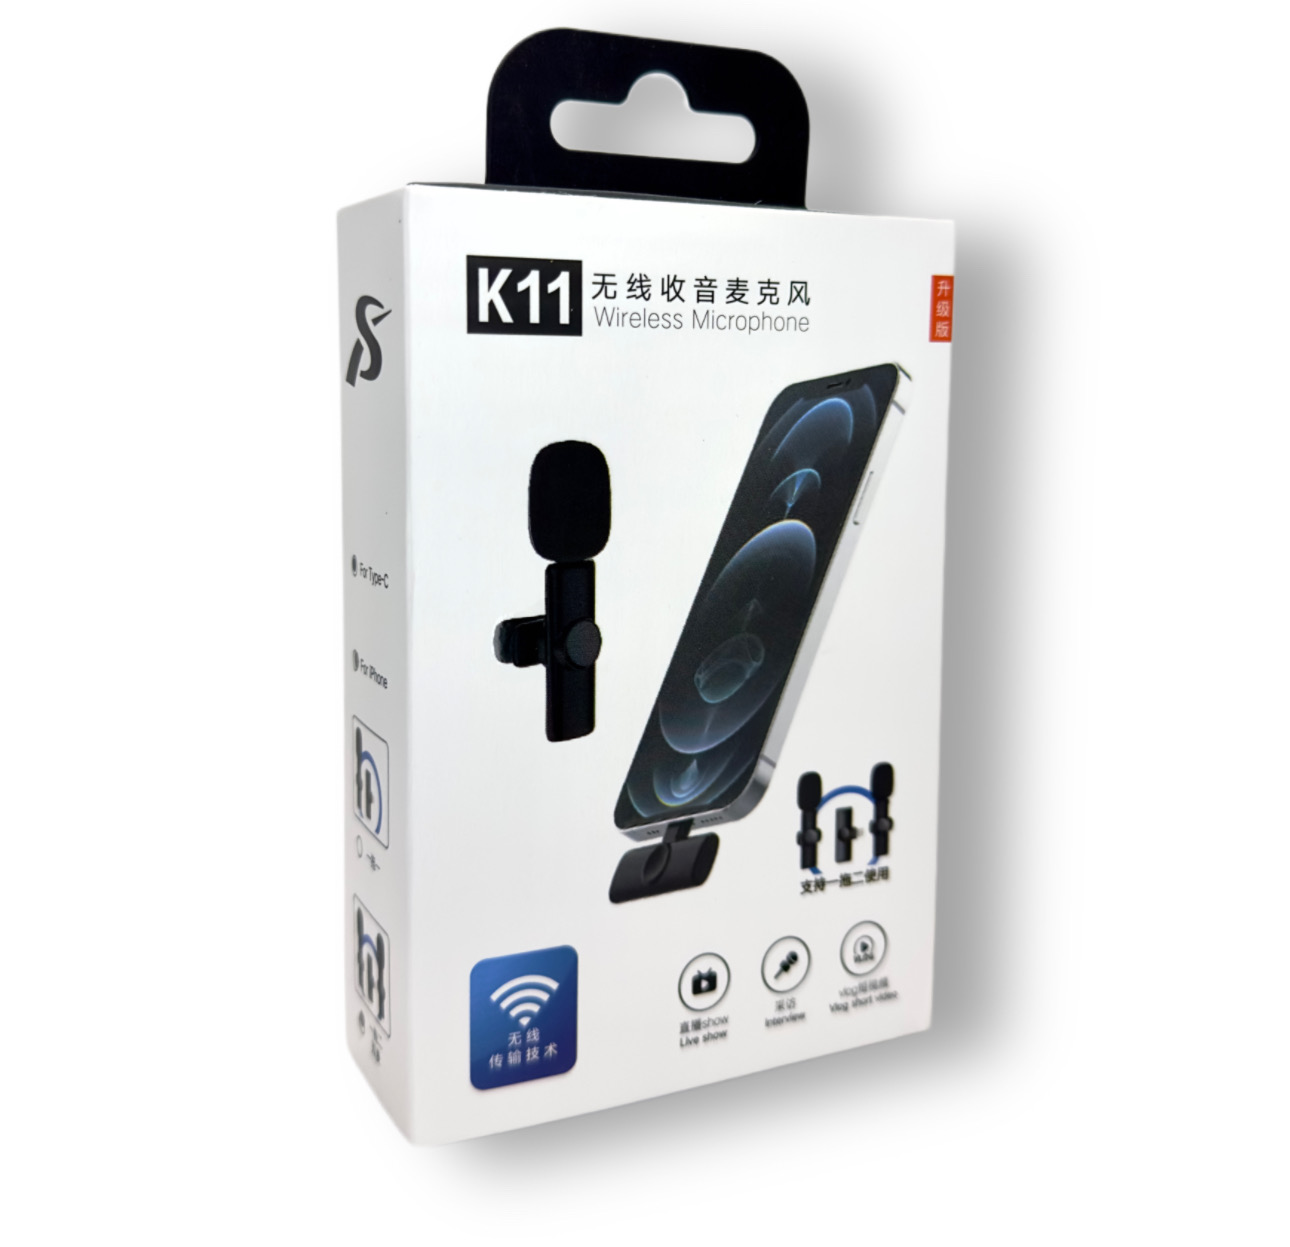 K11 Dual Wireless Mic For Android & Iphone